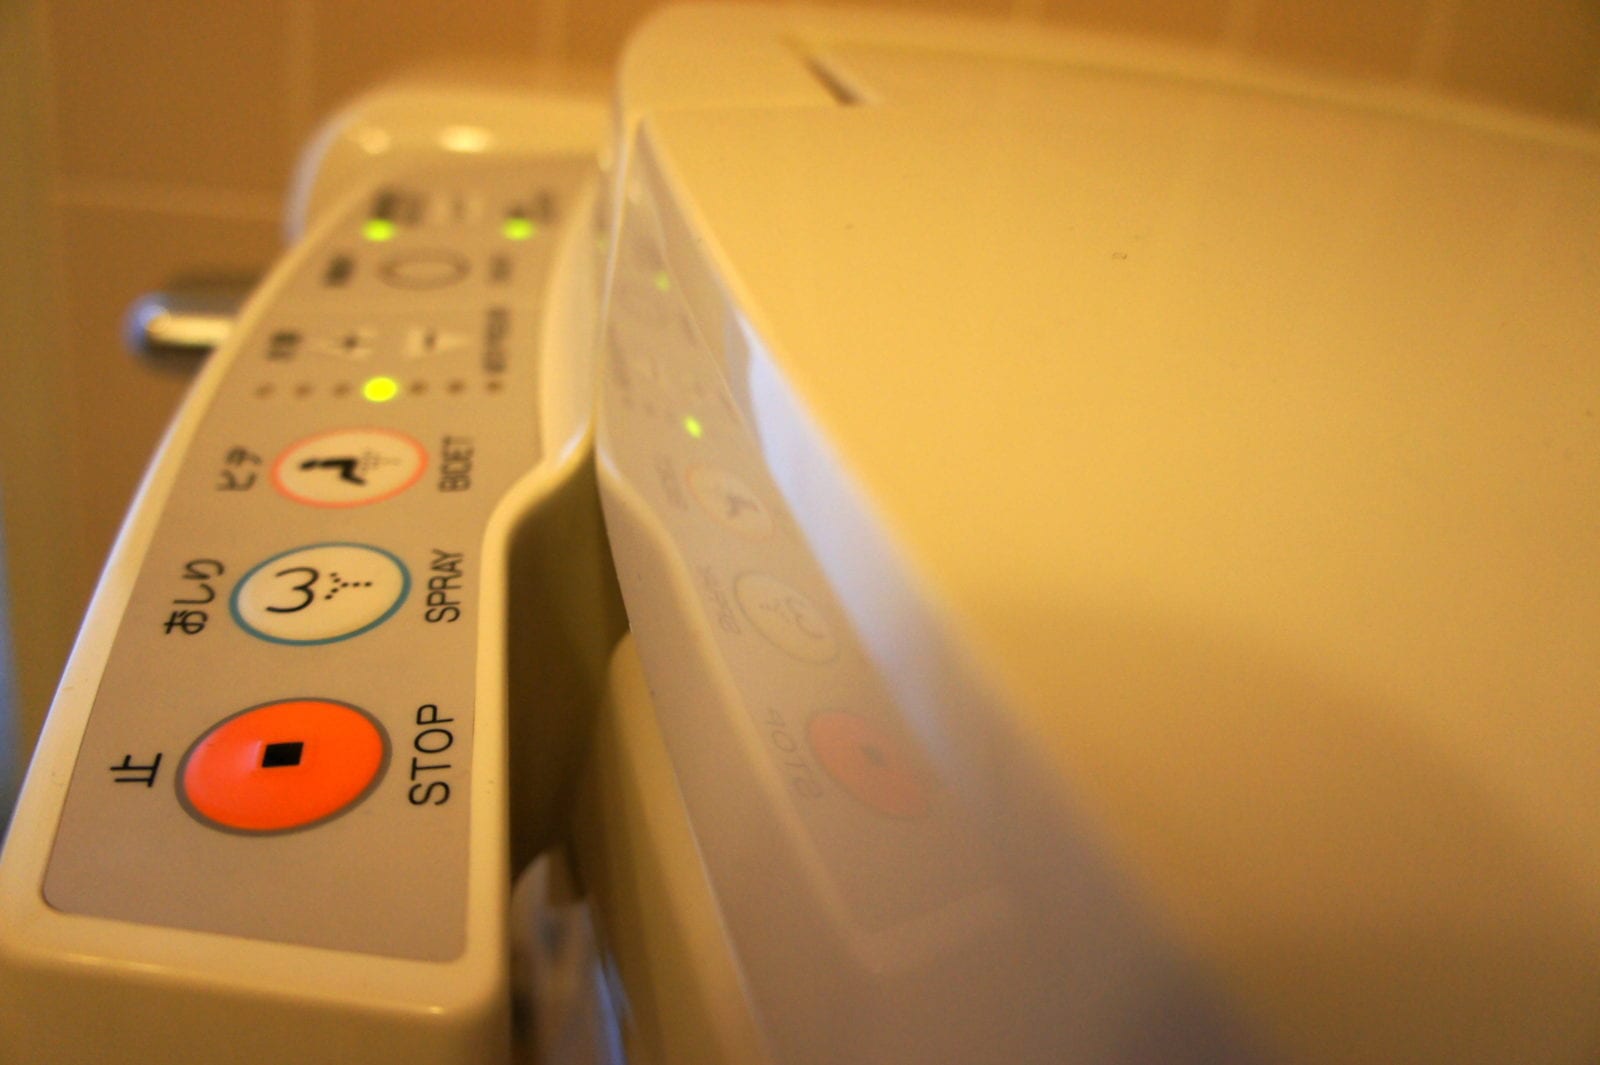 Close-up of Japanese toilet buttons (Photo by Christine Sarkis)